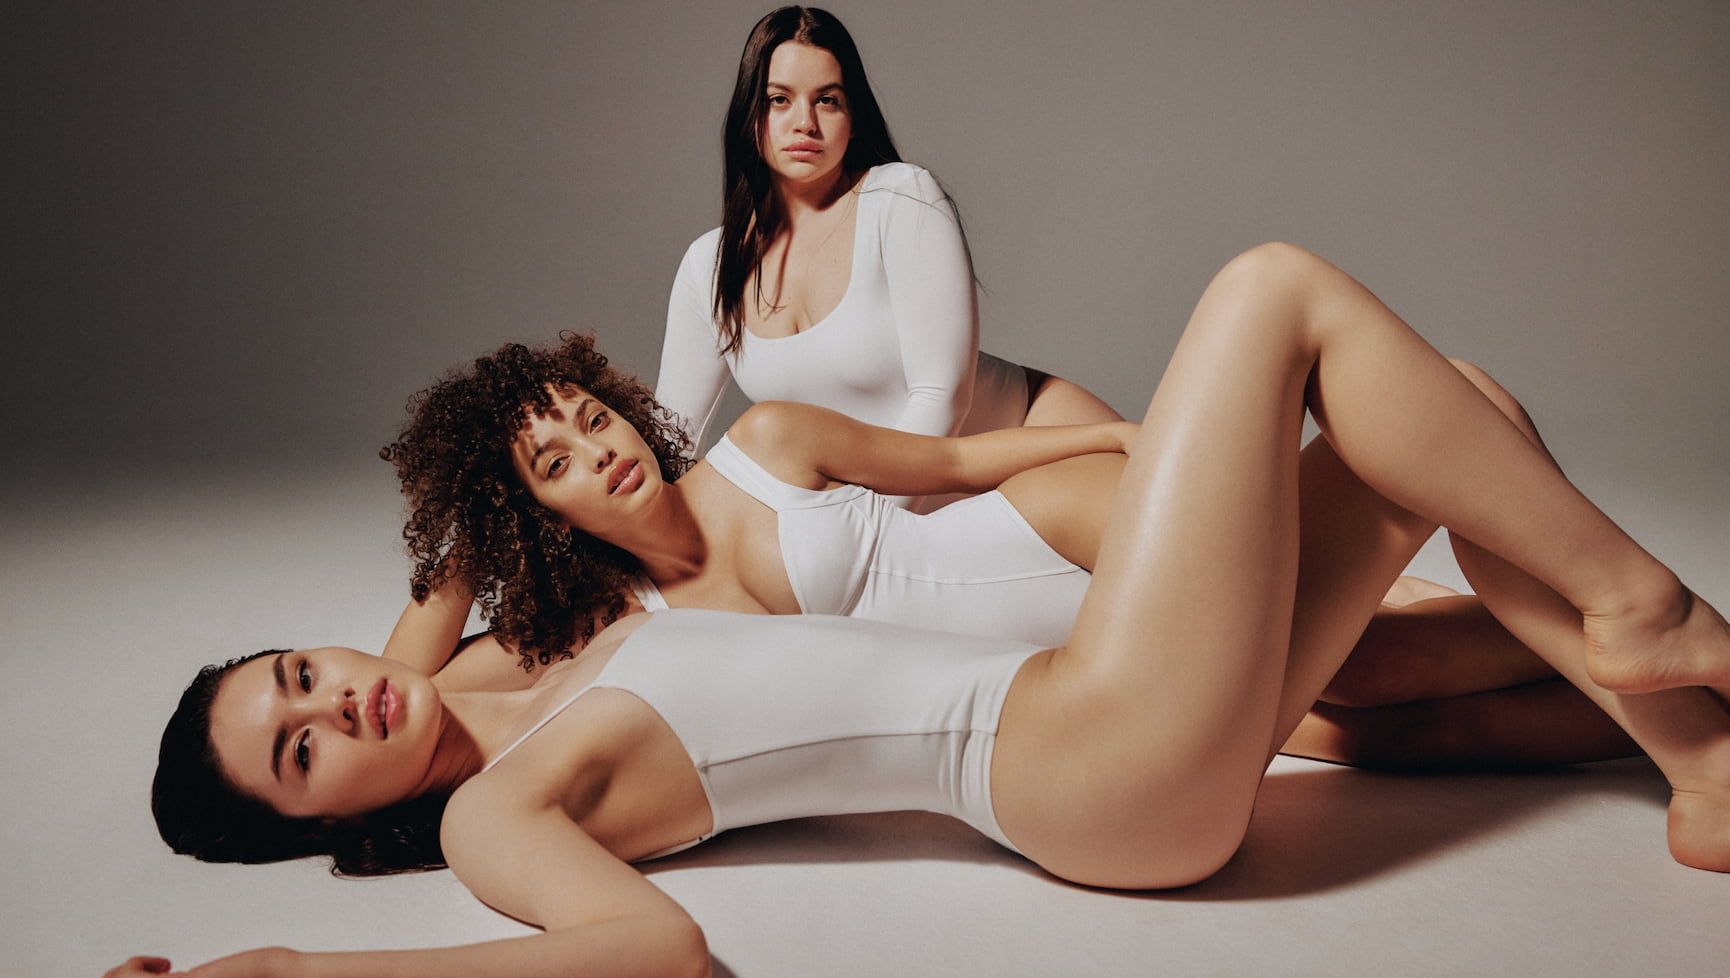 The first model wears a white cami sculpt'd bodysuit, the second model wears a white bustier sculpt'd bodysuit and the third model wears a long sleeve round neckline white sculpt'd bodysuit.